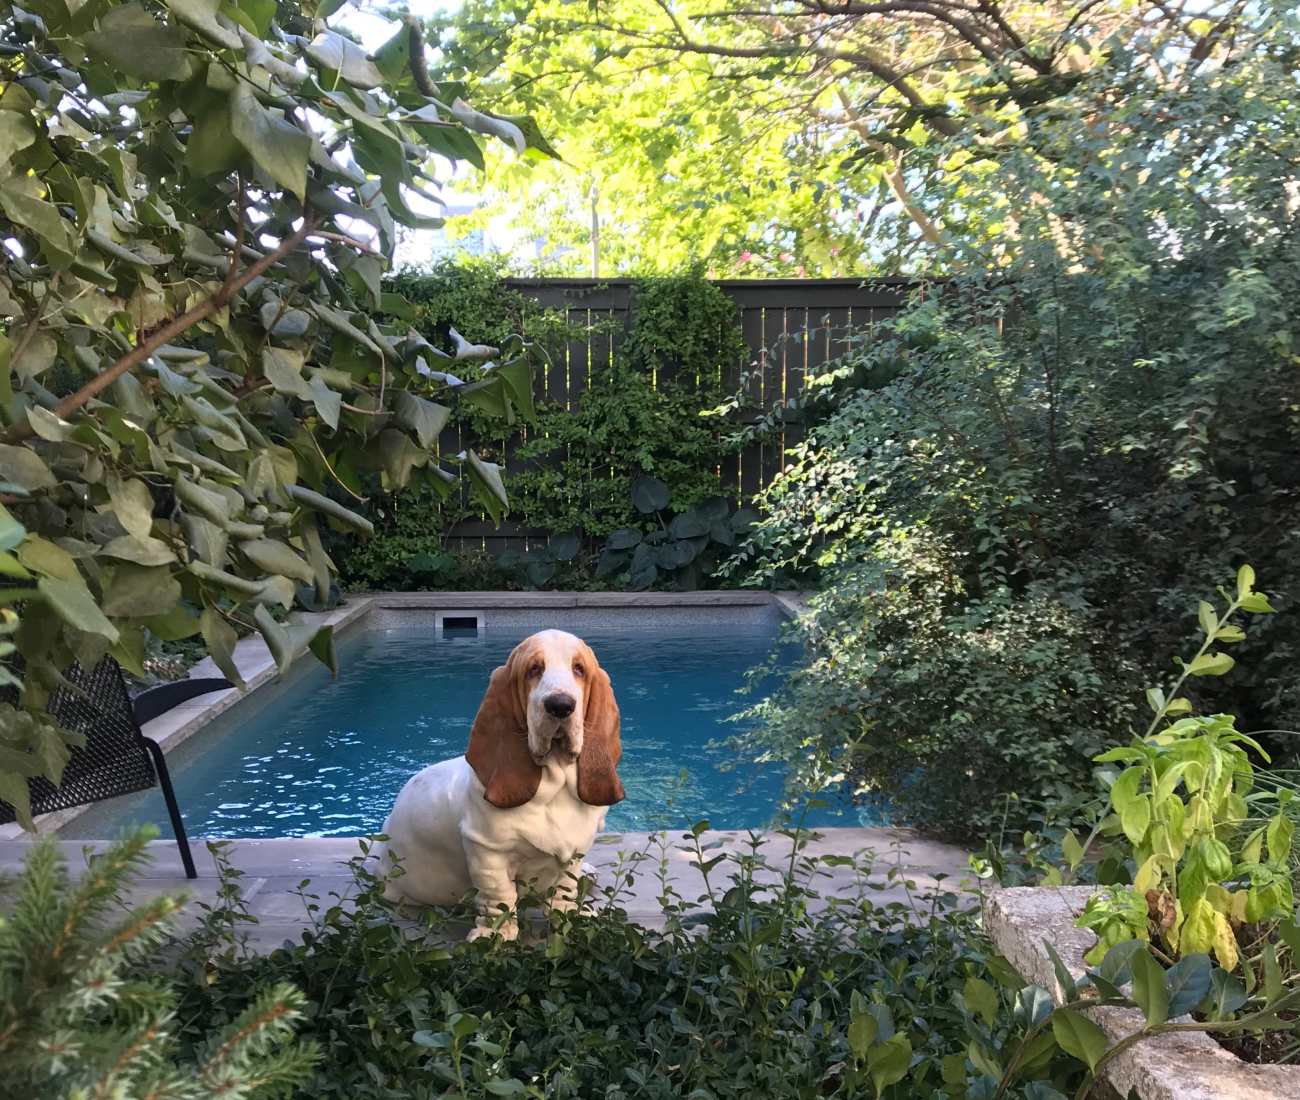 Donnelly and Puchala's 10-month-old basset hound, Gustav.